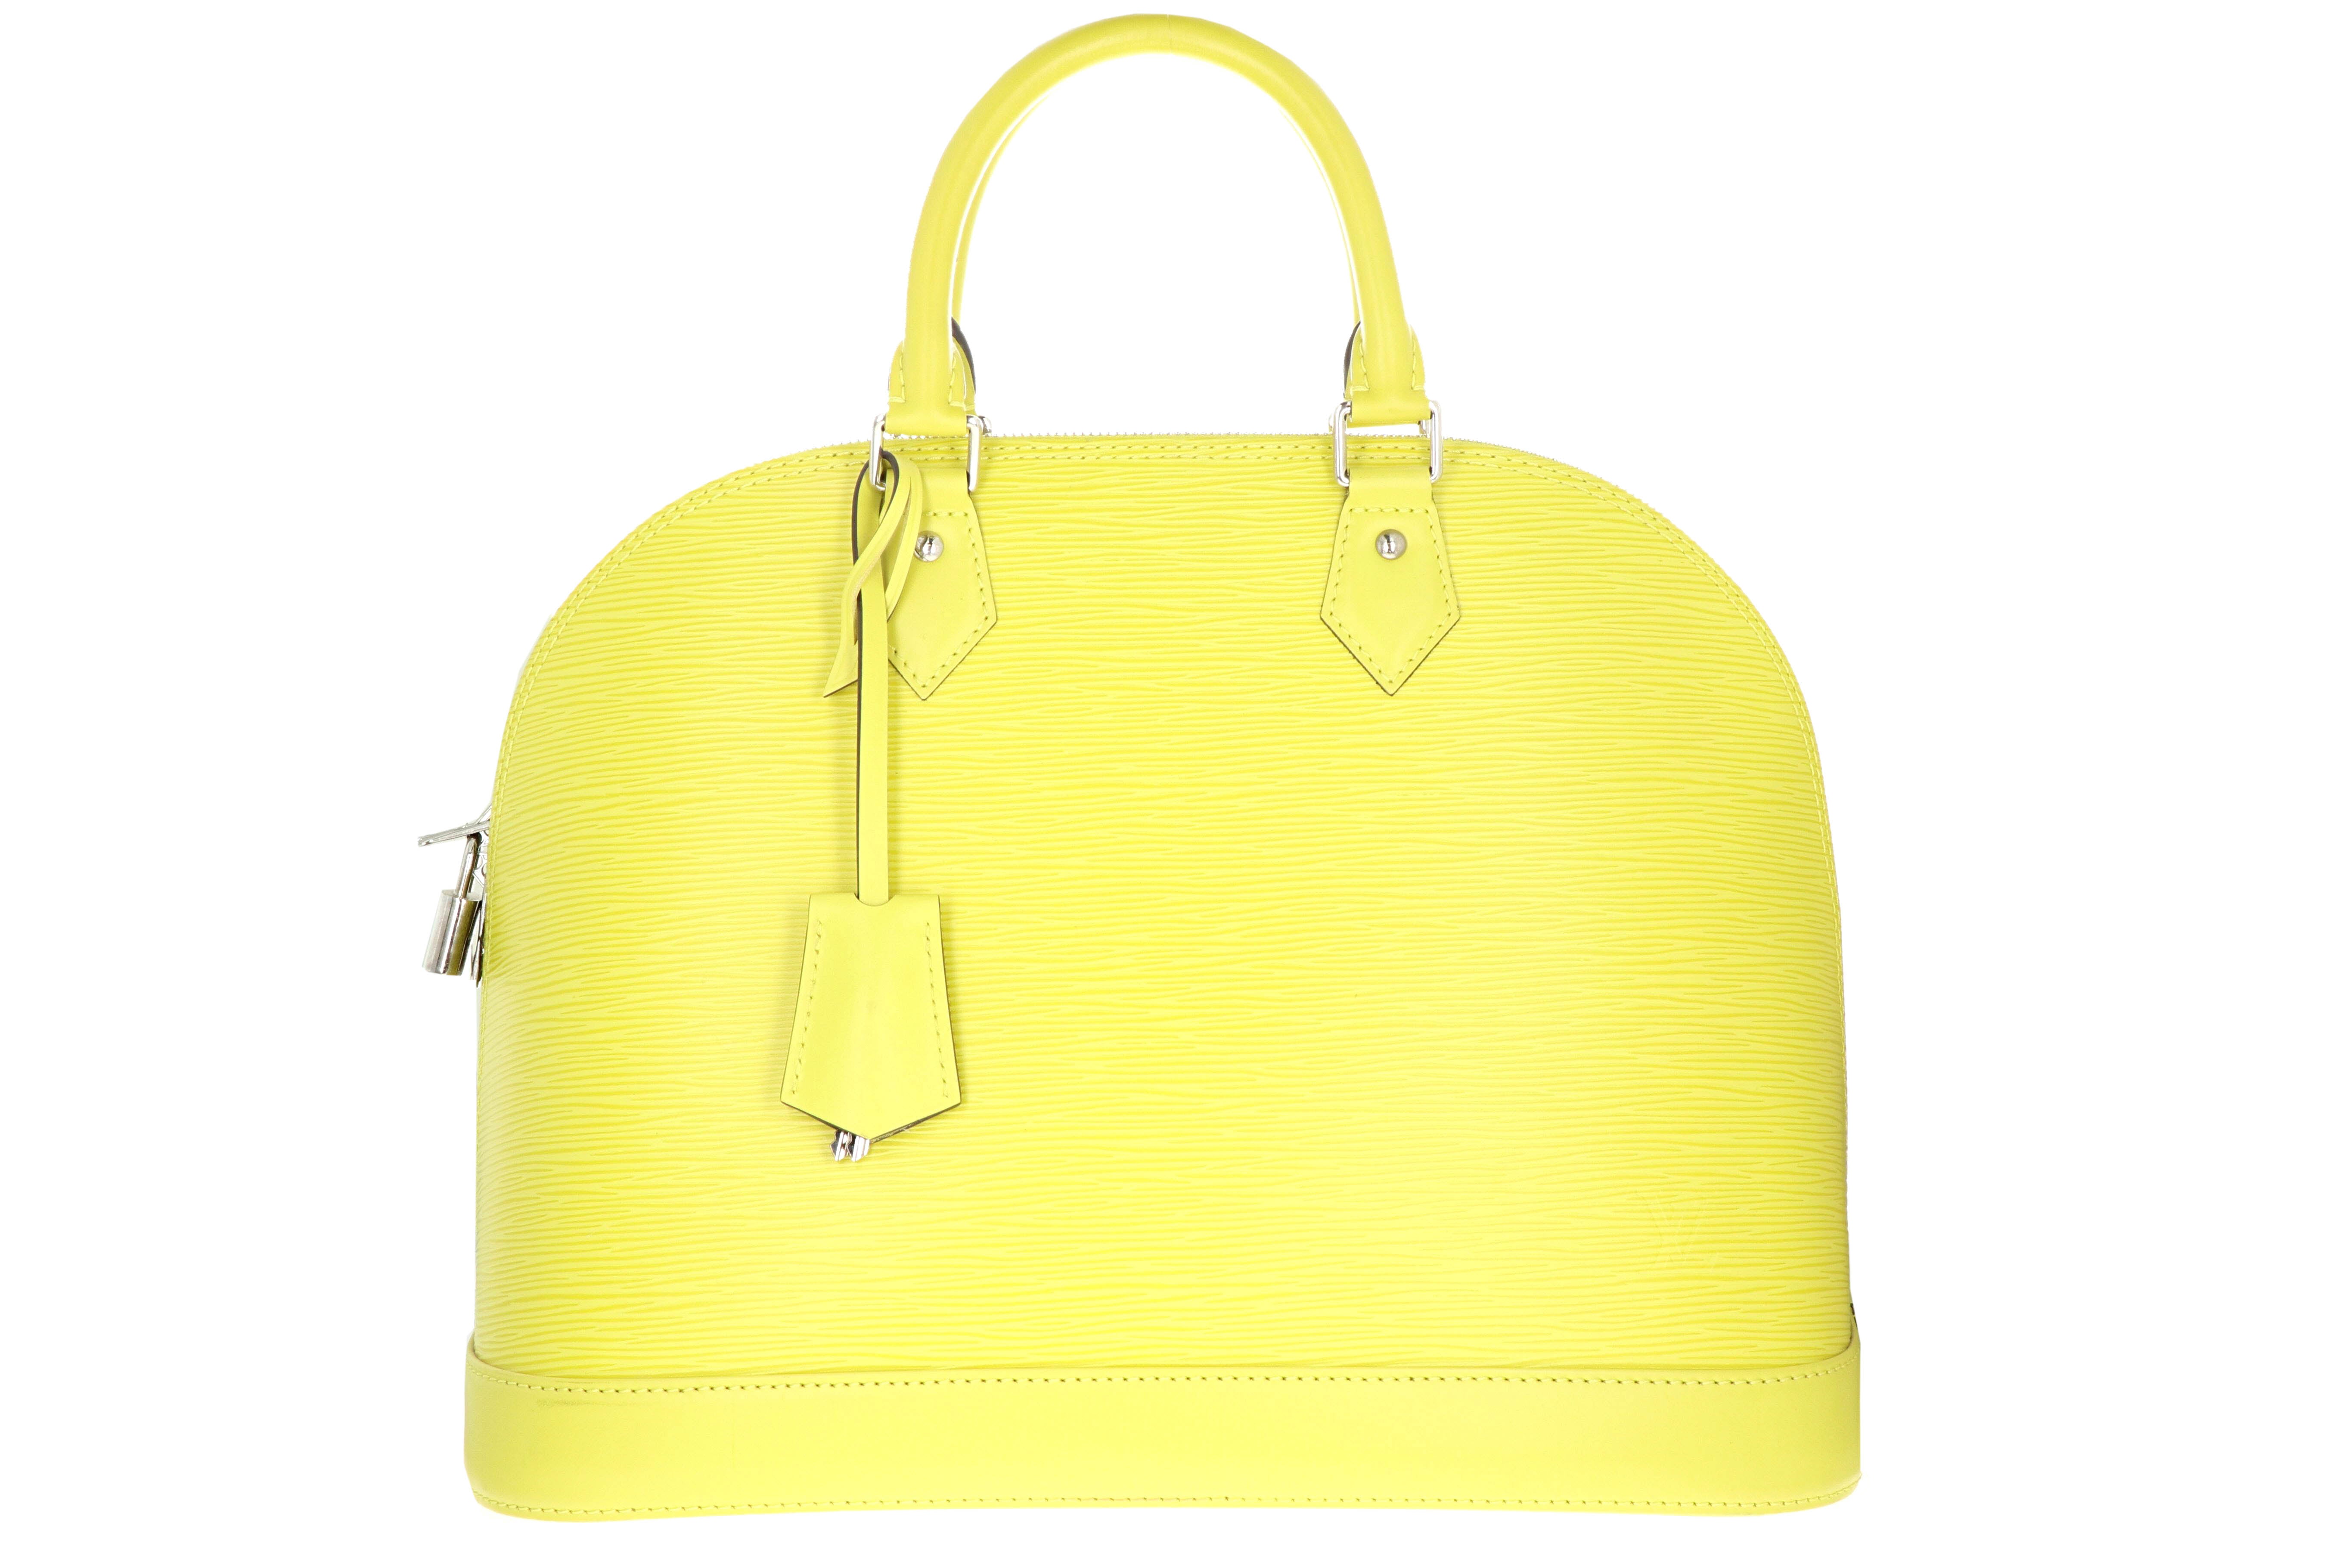 Sold at Auction: Louis Vuitton, LOUIS VUITTON, NEON YELLOW OUTDOOR